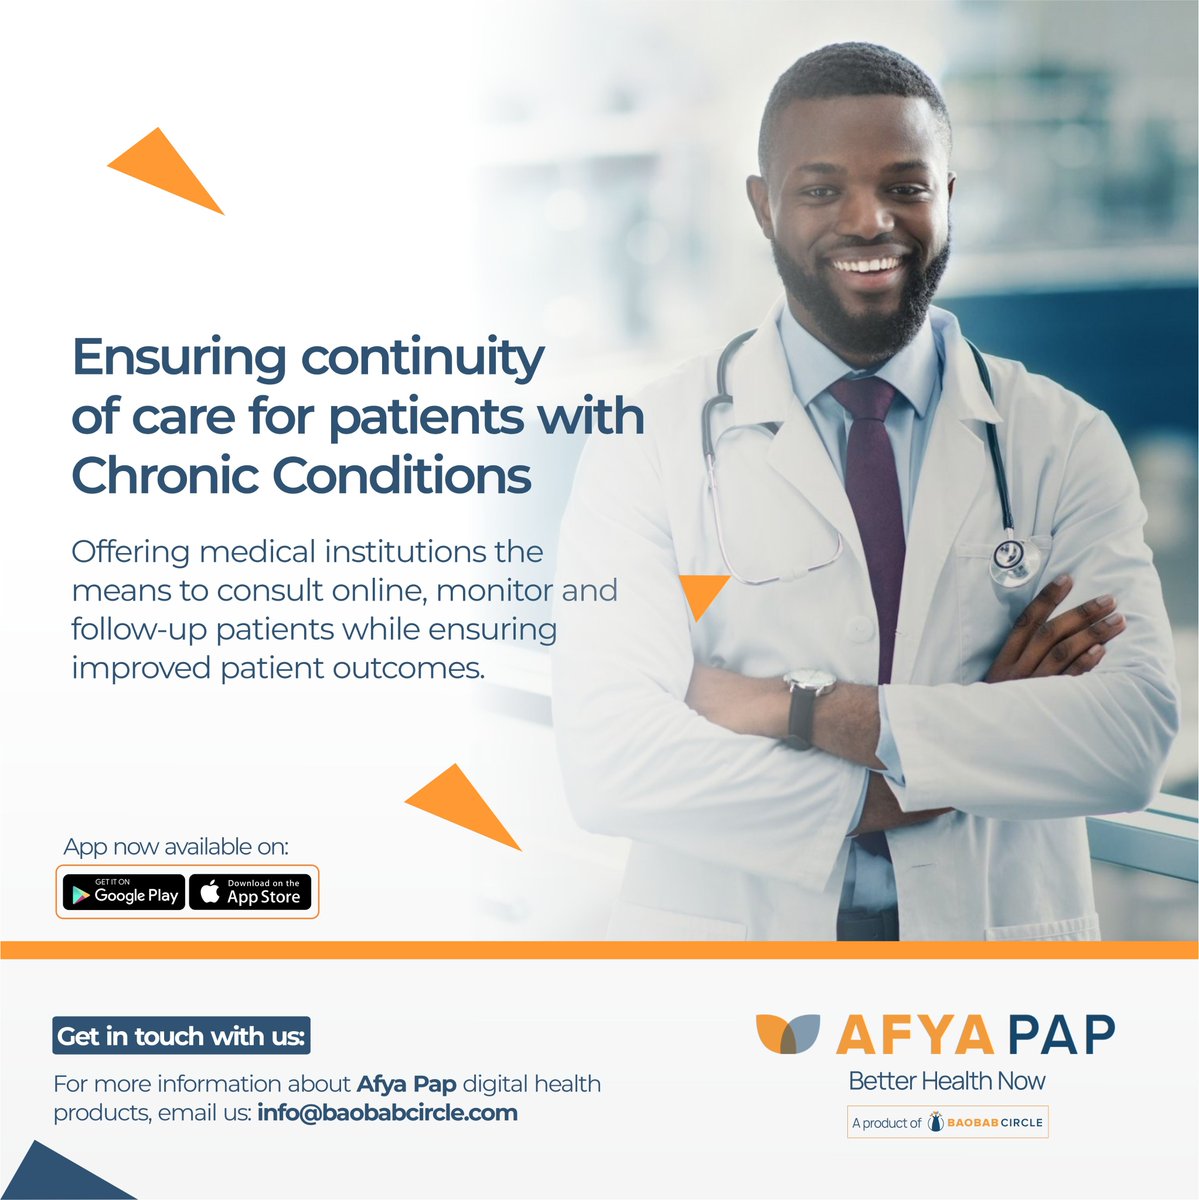 Follow up with your patients remotely from anywhere, any time, using our seamless remote monitoring solution.

Reach out to us via our email info@baobabcircle.com

#remotepatientmonitoring #continuityofcare #afyapap #patienthealth